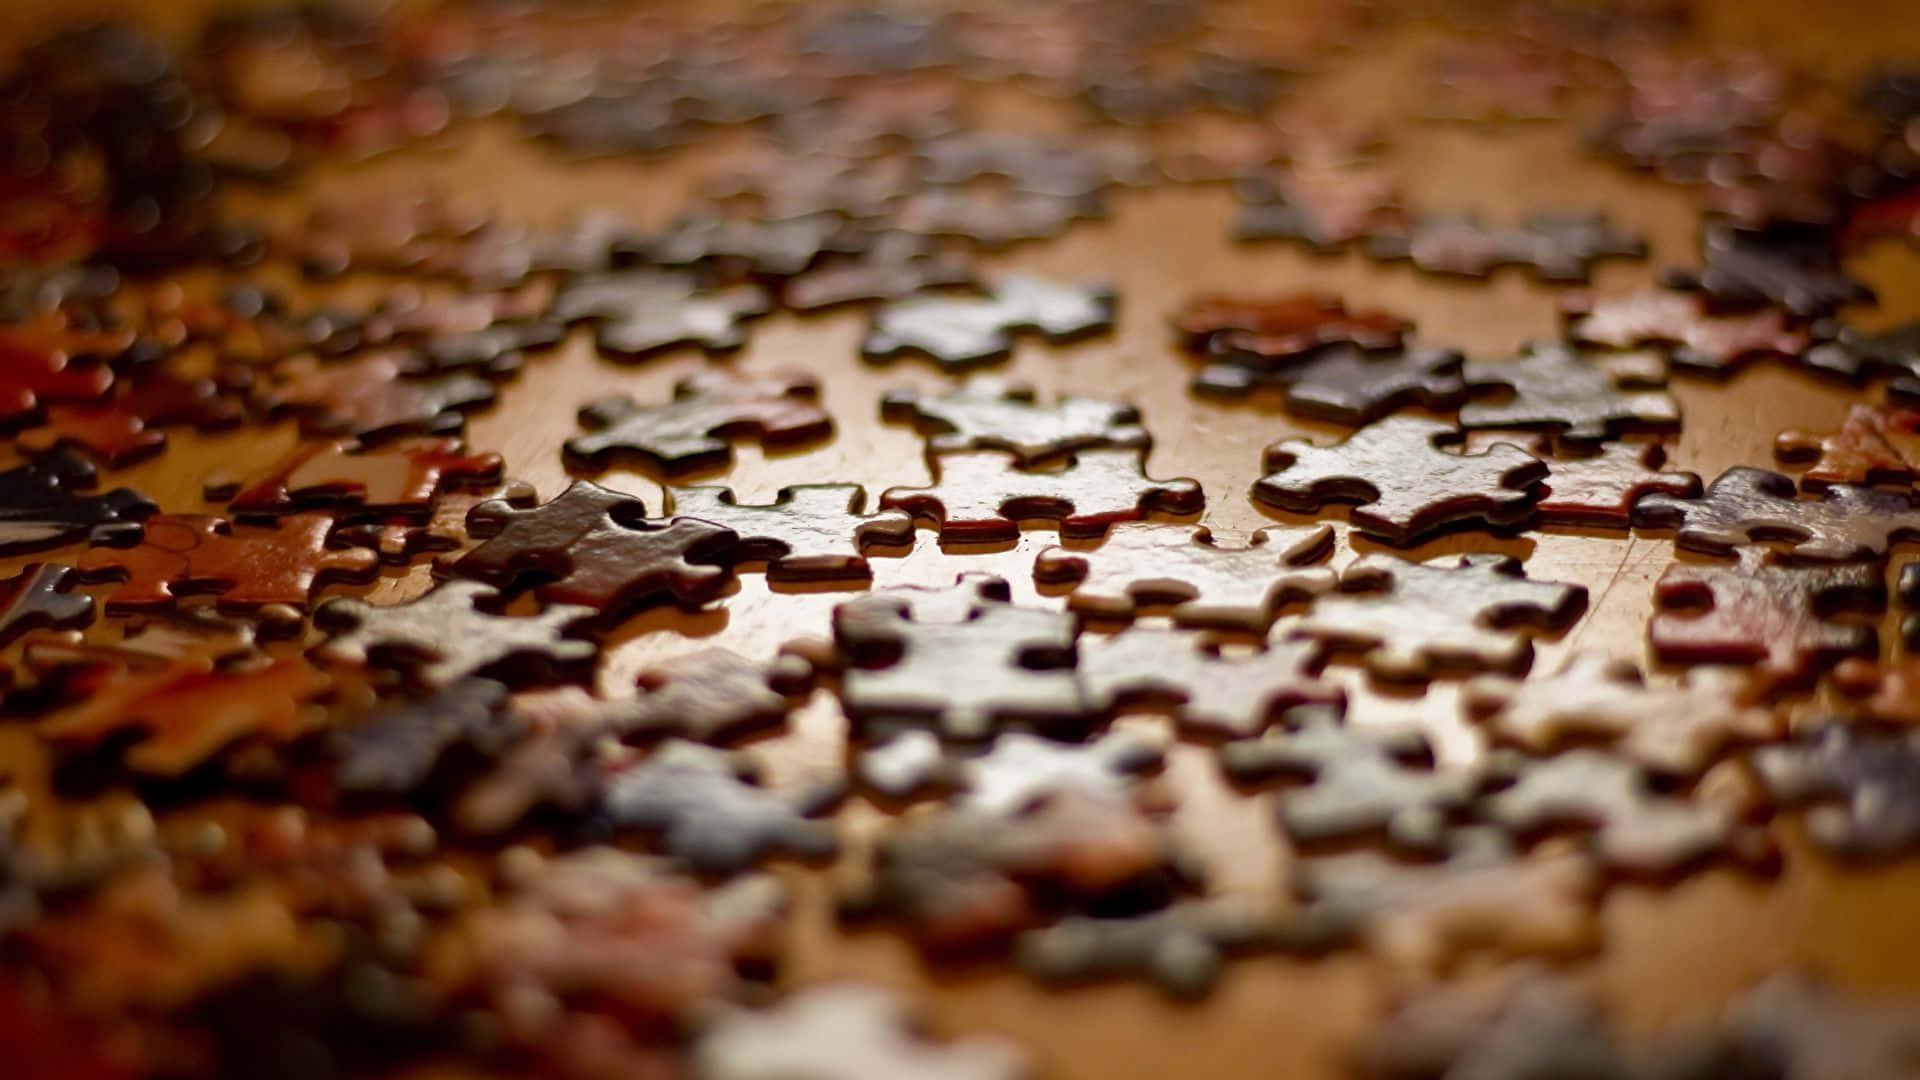 Assembling the World through Puzzle Pieces